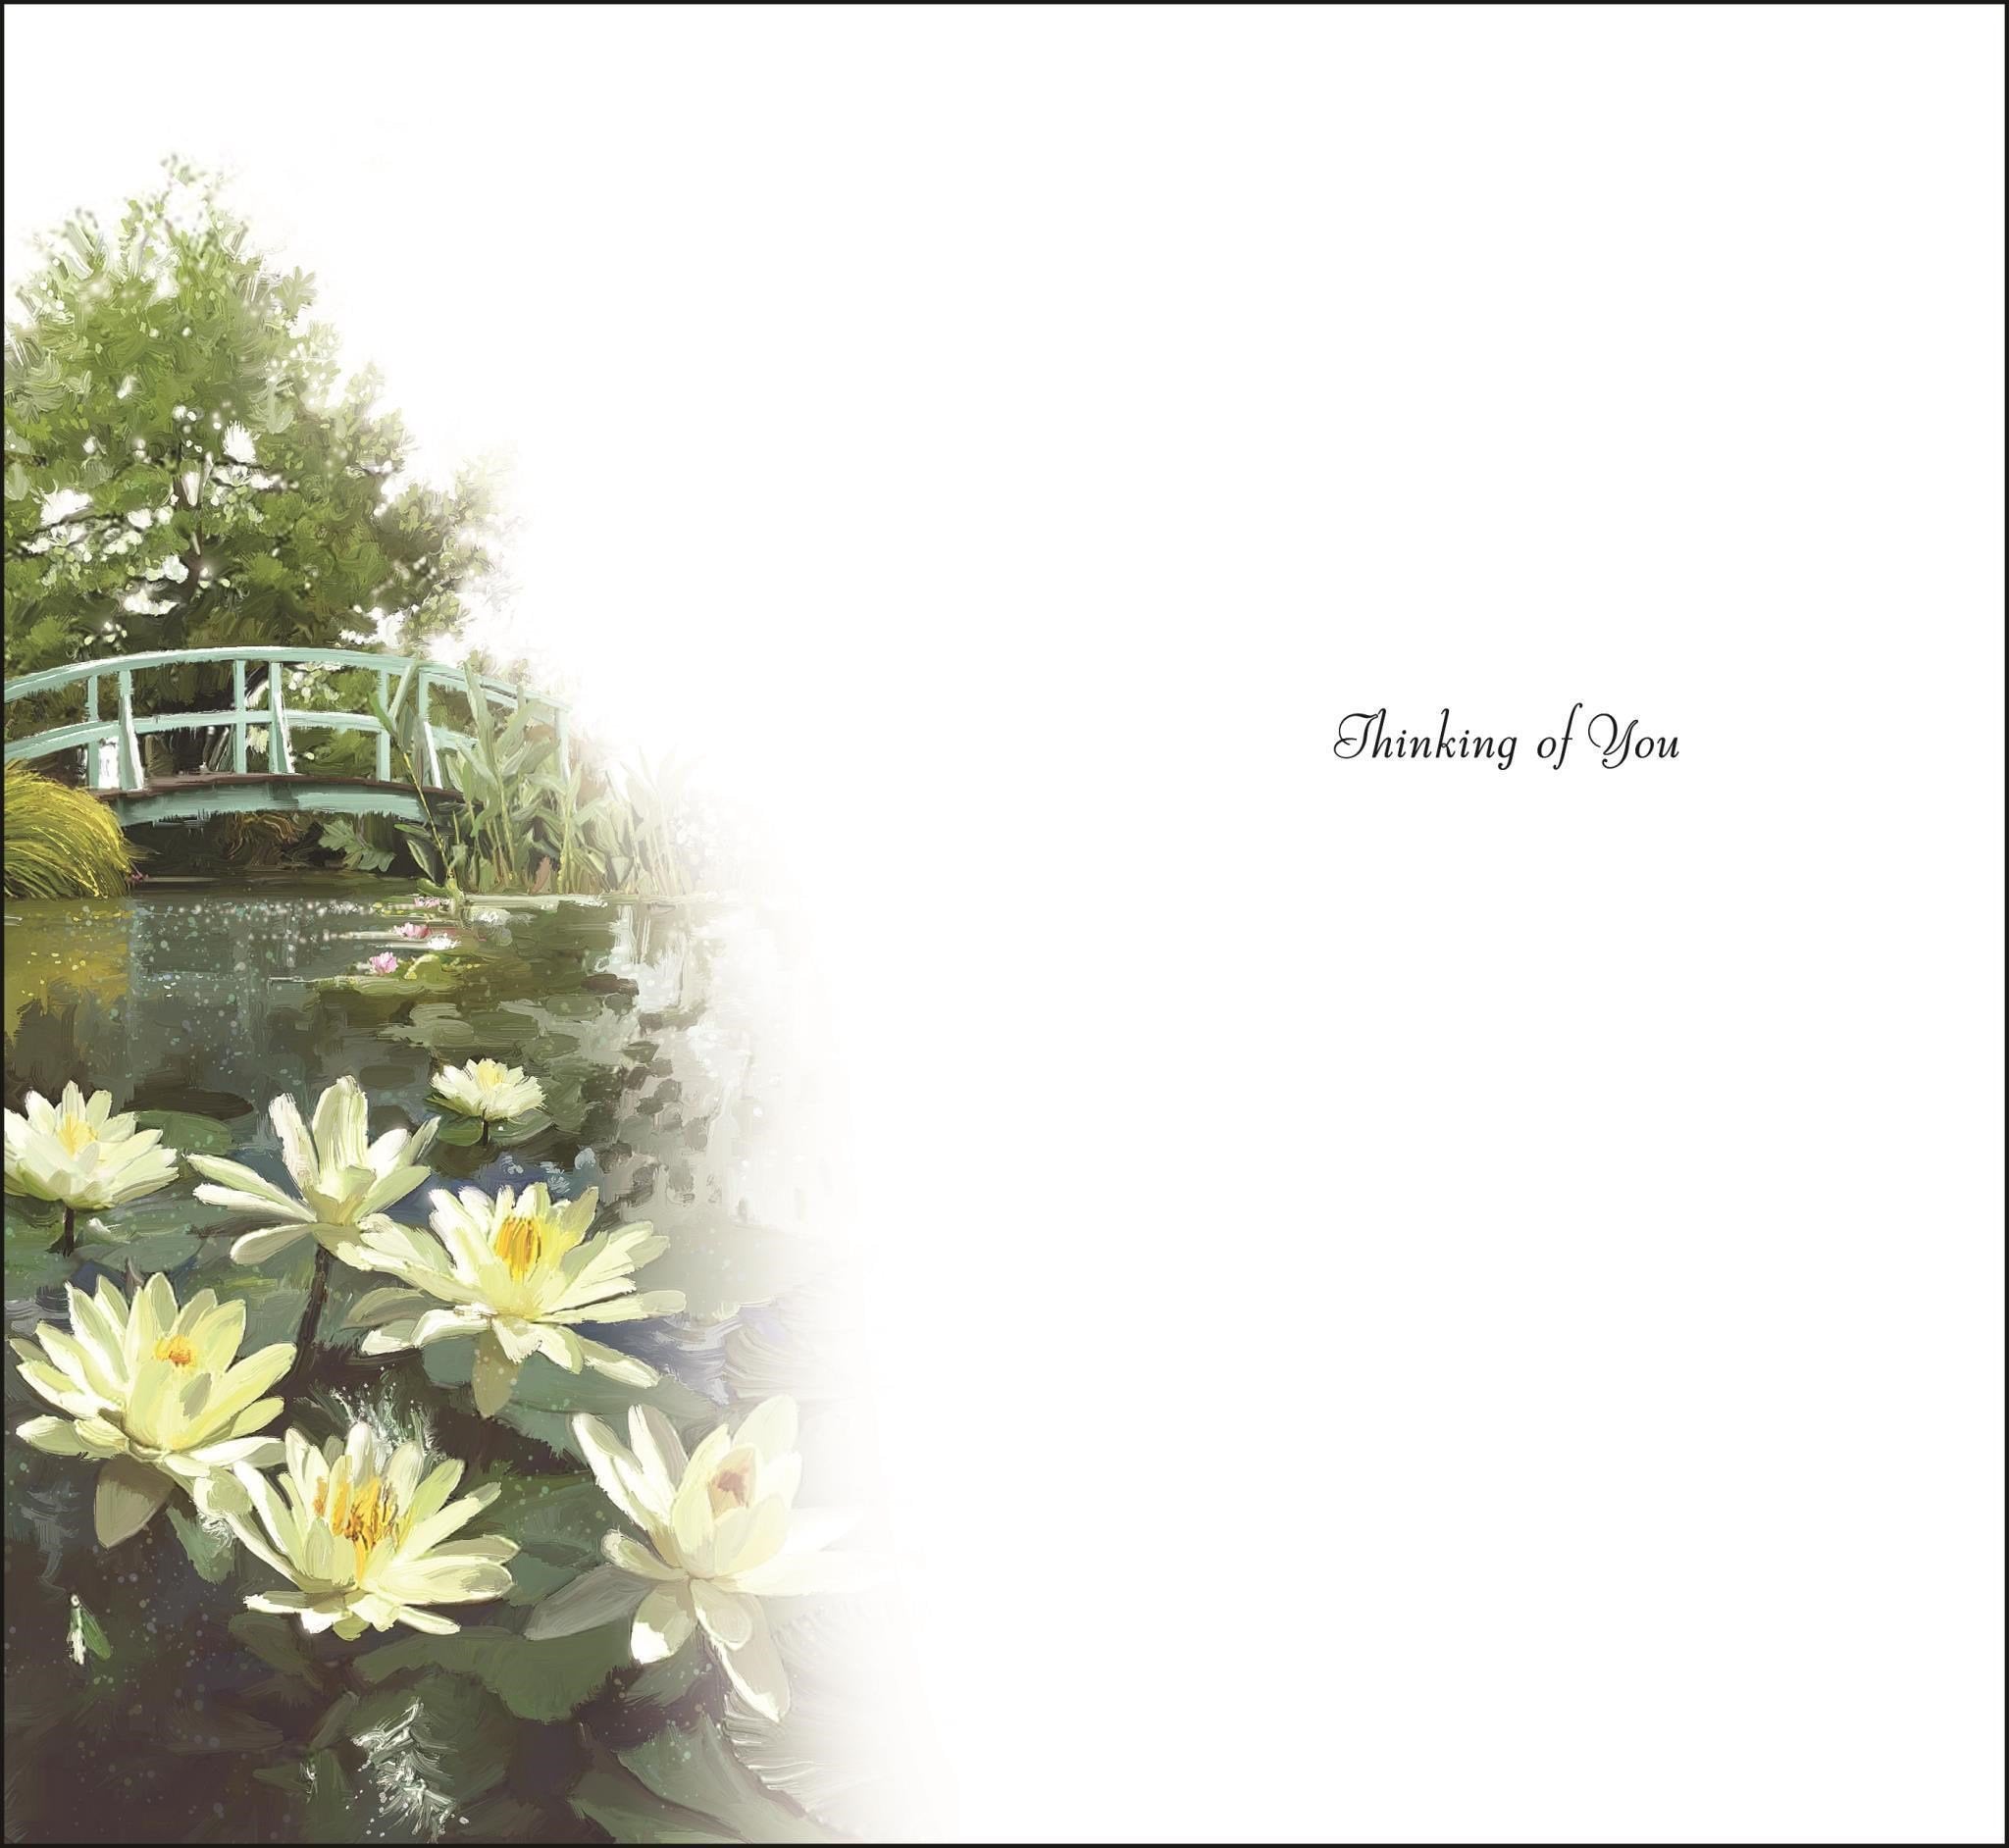 Inside of With Sympathy Water Lily Greetings Card